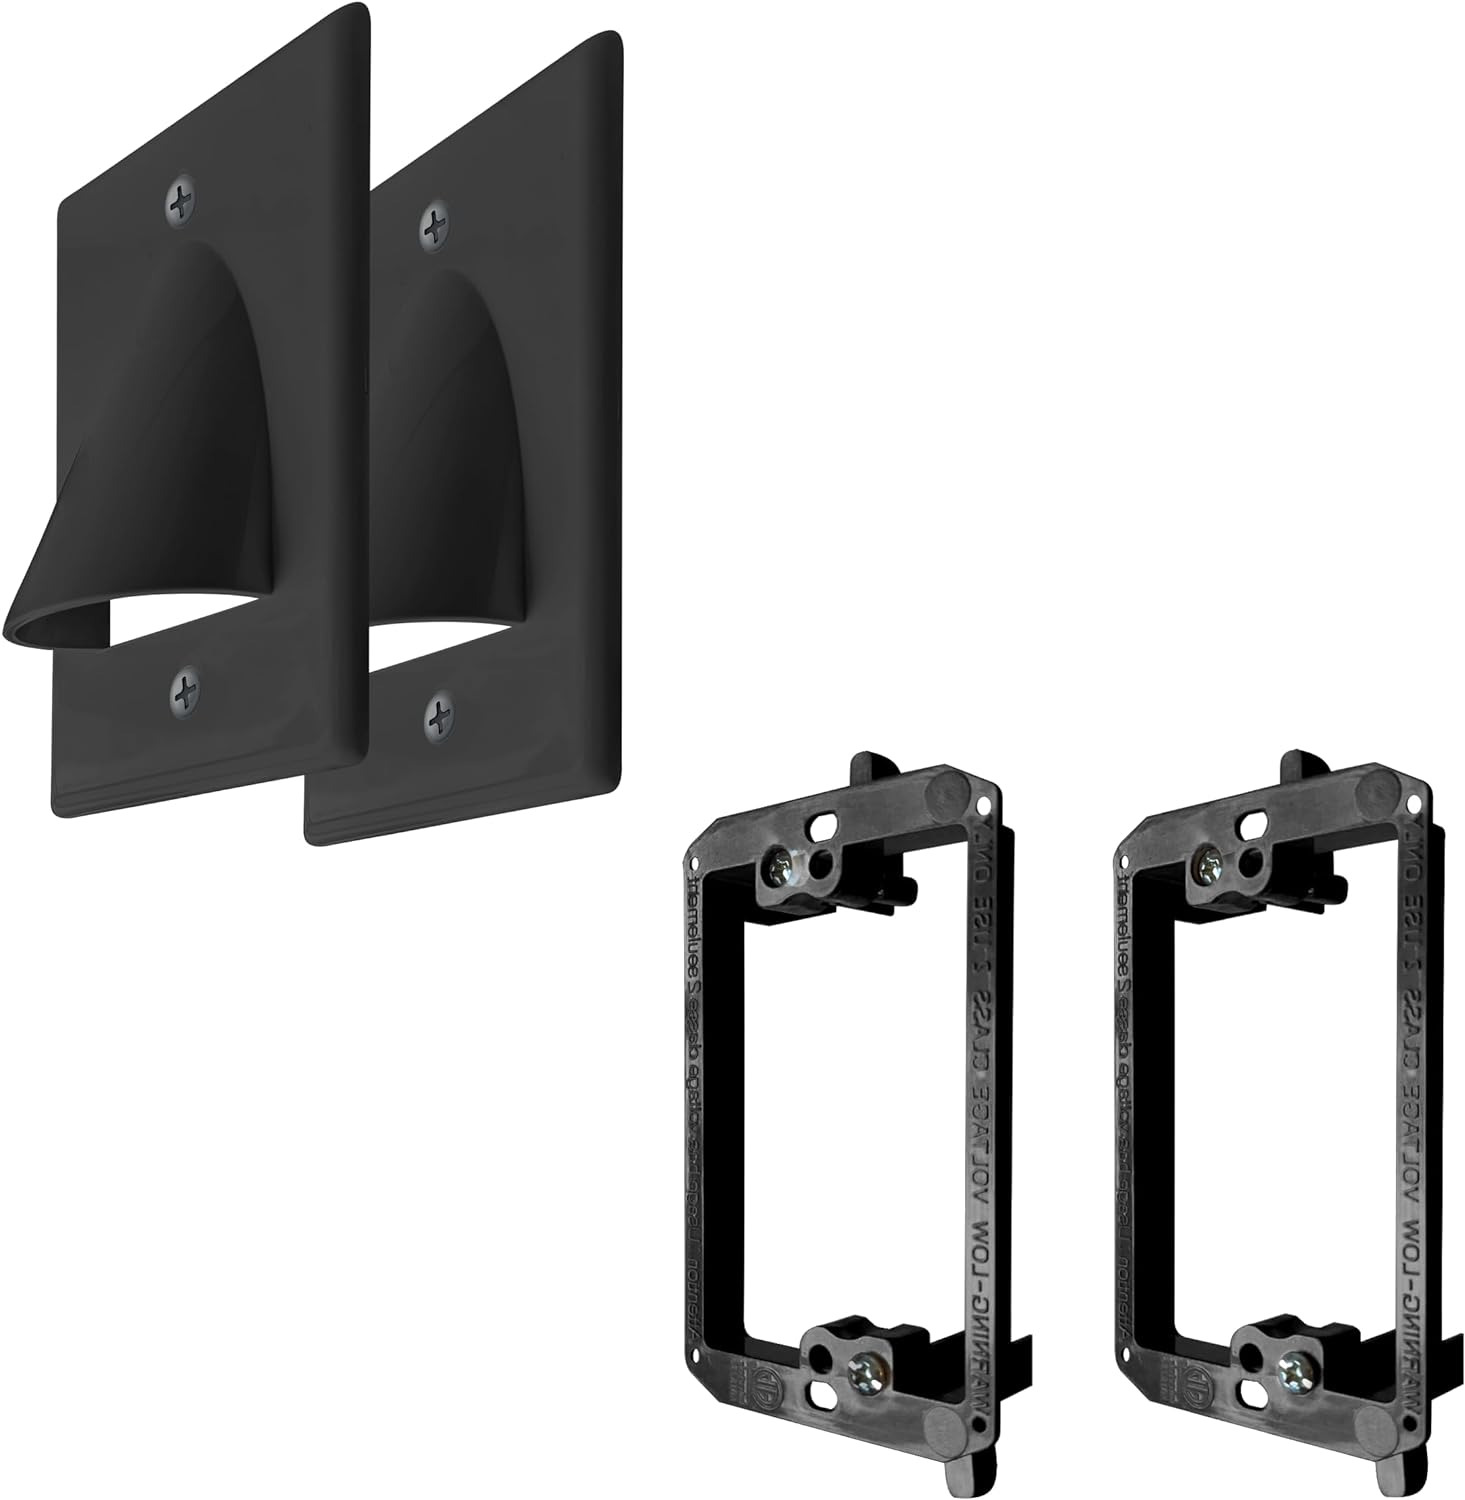 Bestmounts - 2 Pack in Wall Cable Management Kit - Recessed Wall Plate Cable ...